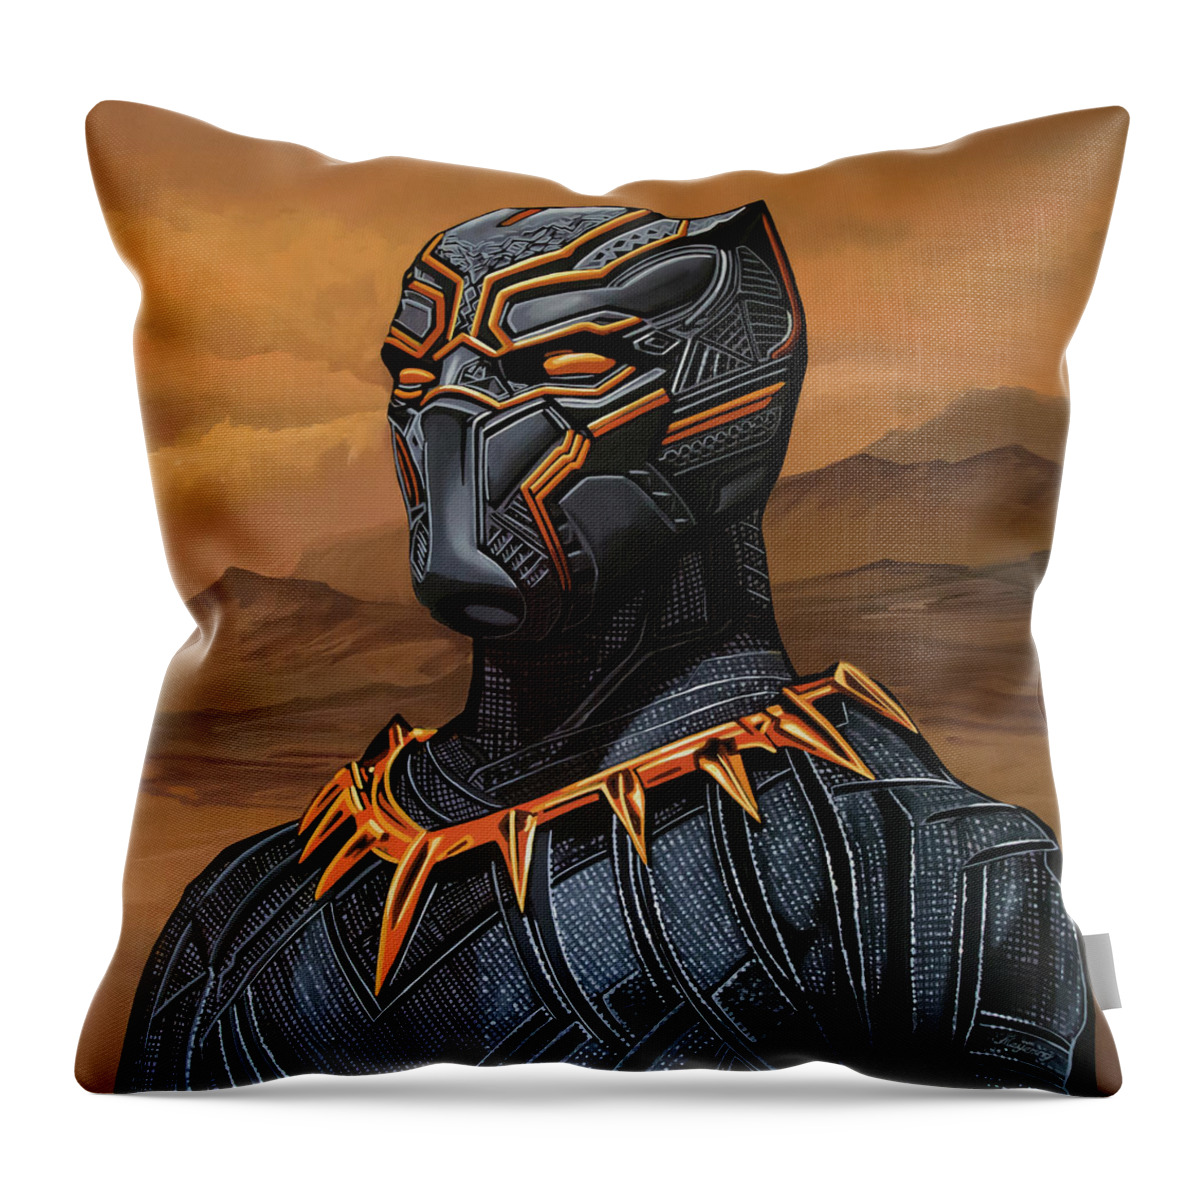 Chadwick Boseman Throw Pillow featuring the painting Black Panther Painting by Paul Meijering